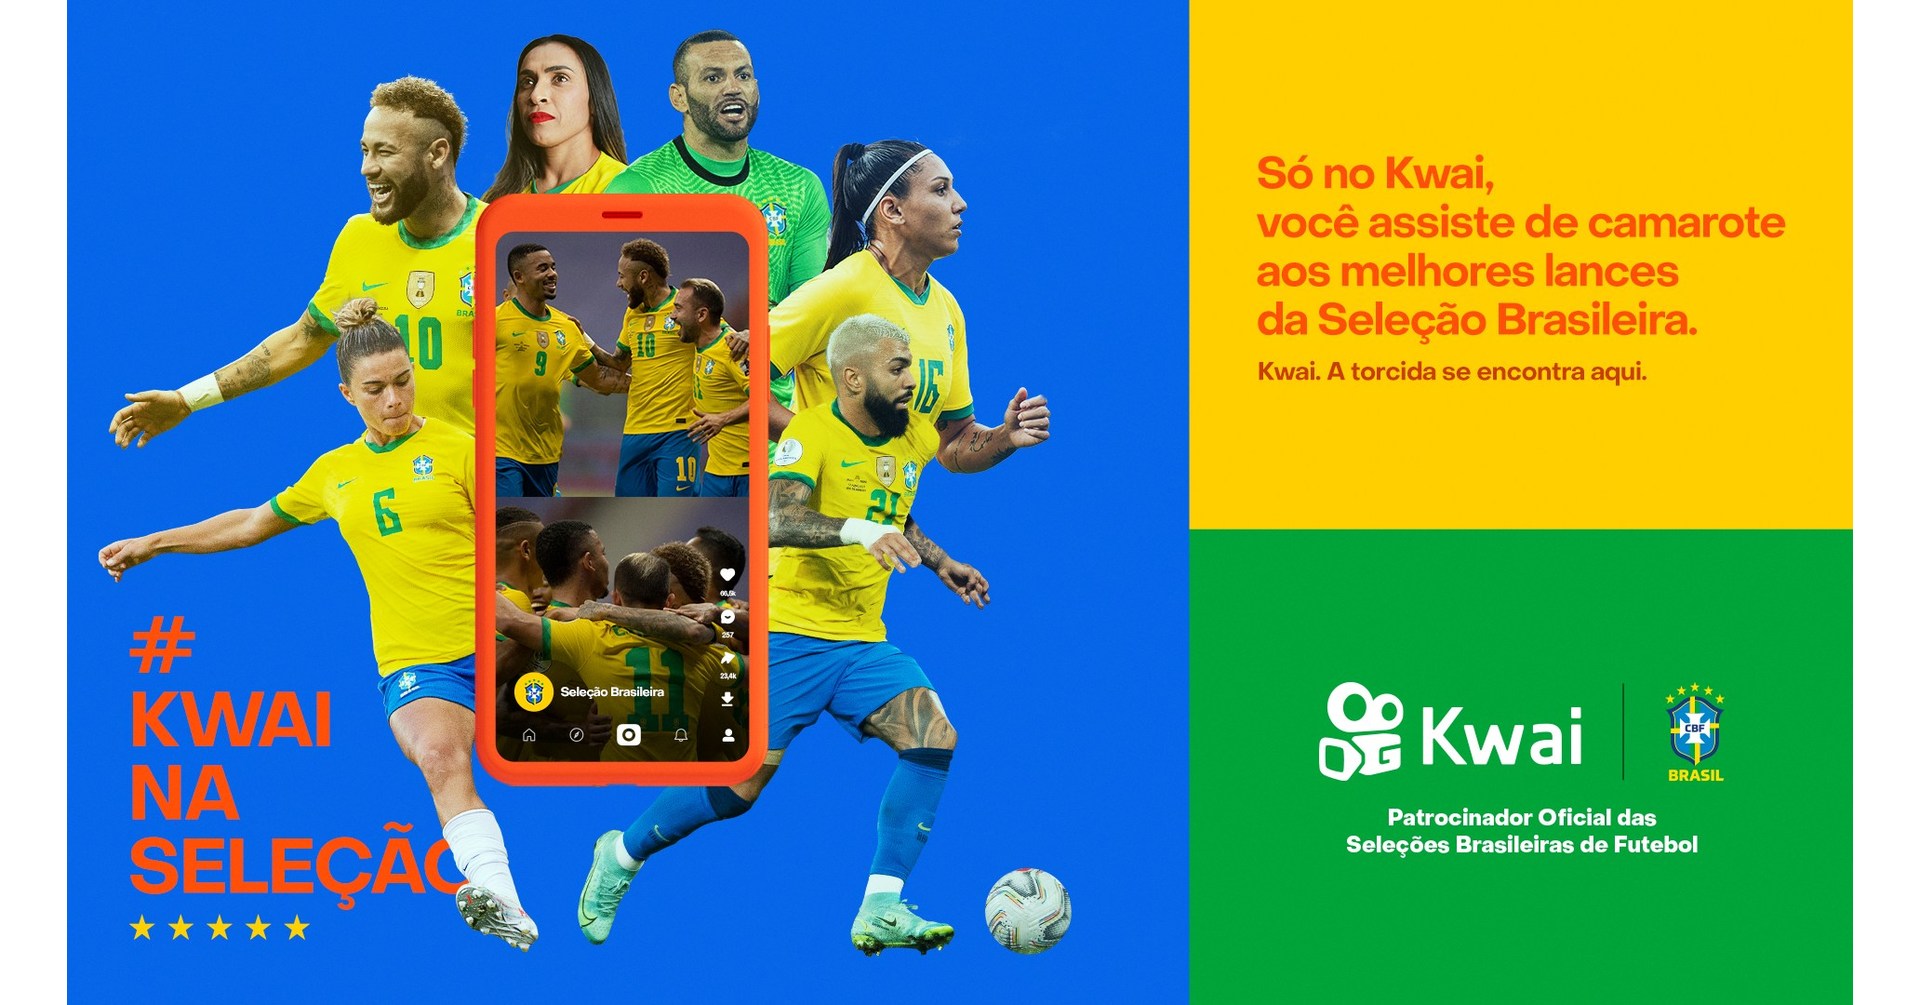 Kwai launches ad platform in Brazil, Kwai for Business